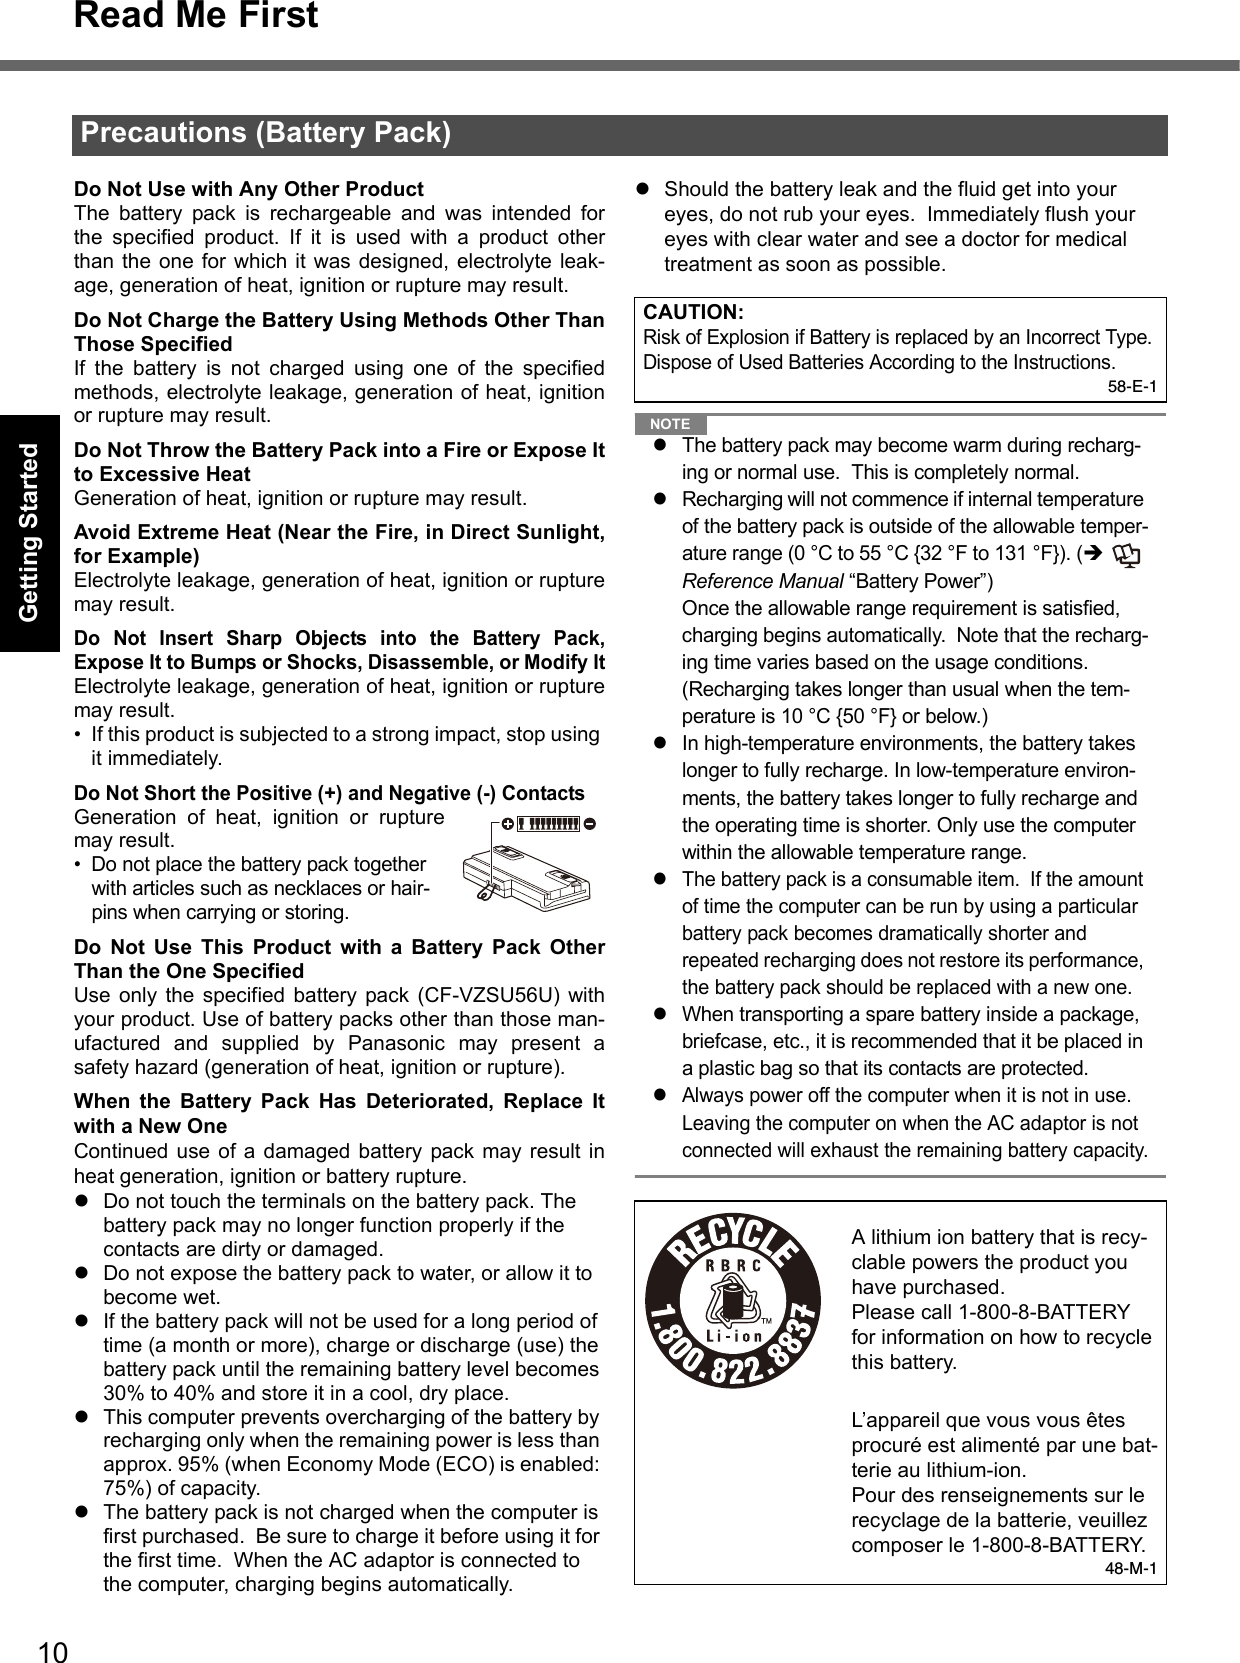 10Read Me FirstGetting StartedUseful InformationTroubleshootingAppendixDo Not Use with Any Other ProductThe battery pack is rechargeable and was intended forthe specified product. If it is used with a product otherthan the one for which it was designed, electrolyte leak-age, generation of heat, ignition or rupture may result.Do Not Charge the Battery Using Methods Other ThanThose SpecifiedIf the battery is not charged using one of the specifiedmethods, electrolyte leakage, generation of heat, ignitionor rupture may result.Do Not Throw the Battery Pack into a Fire or Expose Itto Excessive HeatGeneration of heat, ignition or rupture may result.Avoid Extreme Heat (Near the Fire, in Direct Sunlight,for Example)Electrolyte leakage, generation of heat, ignition or rupturemay result.Do Not Insert Sharp Objects into the Battery Pack,Expose It to Bumps or Shocks, Disassemble, or Modify ItElectrolyte leakage, generation of heat, ignition or rupturemay result.• If this product is subjected to a strong impact, stop using it immediately.Do Not Short the Positive (+) and Negative (-) ContactsGeneration of heat, ignition or rupturemay result. • Do not place the battery pack together with articles such as necklaces or hair-pins when carrying or storing.Do Not Use This Product with a Battery Pack OtherThan the One SpecifiedUse only the specified battery pack (CF-VZSU56U) withyour product. Use of battery packs other than those man-ufactured and supplied by Panasonic may present asafety hazard (generation of heat, ignition or rupture).When the Battery Pack Has Deteriorated, Replace Itwith a New OneContinued use of a damaged battery pack may result inheat generation, ignition or battery rupture.zDo not touch the terminals on the battery pack. The battery pack may no longer function properly if the contacts are dirty or damaged.zDo not expose the battery pack to water, or allow it to become wet.zIf the battery pack will not be used for a long period of time (a month or more), charge or discharge (use) the battery pack until the remaining battery level becomes 30% to 40% and store it in a cool, dry place.zThis computer prevents overcharging of the battery by recharging only when the remaining power is less than approx. 95% (when Economy Mode (ECO) is enabled: 75%) of capacity.zThe battery pack is not charged when the computer is first purchased.  Be sure to charge it before using it for the first time.  When the AC adaptor is connected to the computer, charging begins automatically.zShould the battery leak and the fluid get into your eyes, do not rub your eyes.  Immediately flush your eyes with clear water and see a doctor for medical treatment as soon as possible.NOTEzThe battery pack may become warm during recharg-ing or normal use.  This is completely normal.zRecharging will not commence if internal temperature of the battery pack is outside of the allowable temper-ature range (0 °C to 55 °C {32 °F to 131 °F}). (Î  Reference Manual “Battery Power”)  Once the allowable range requirement is satisfied, charging begins automatically.  Note that the recharg-ing time varies based on the usage conditions. (Recharging takes longer than usual when the tem-perature is 10 °C {50 °F} or below.)zIn high-temperature environments, the battery takes longer to fully recharge. In low-temperature environ-ments, the battery takes longer to fully recharge and the operating time is shorter. Only use the computer within the allowable temperature range.zThe battery pack is a consumable item.  If the amount of time the computer can be run by using a particular battery pack becomes dramatically shorter and repeated recharging does not restore its performance, the battery pack should be replaced with a new one.  zWhen transporting a spare battery inside a package, briefcase, etc., it is recommended that it be placed in a plastic bag so that its contacts are protected.zAlways power off the computer when it is not in use. Leaving the computer on when the AC adaptor is not connected will exhaust the remaining battery capacity.Precautions (Battery Pack)CAUTION:Risk of Explosion if Battery is replaced by an Incorrect Type.Dispose of Used Batteries According to the Instructions.58-E-1A lithium ion battery that is recy-clable powers the product you have purchased.Please call 1-800-8-BATTERY for information on how to recycle this battery.L’appareil que vous vous êtes procuré est alimenté par une bat-terie au lithium-ion.Pour des renseignements sur le recyclage de la batterie, veuillez composer le 1-800-8-BATTERY.48-M-1